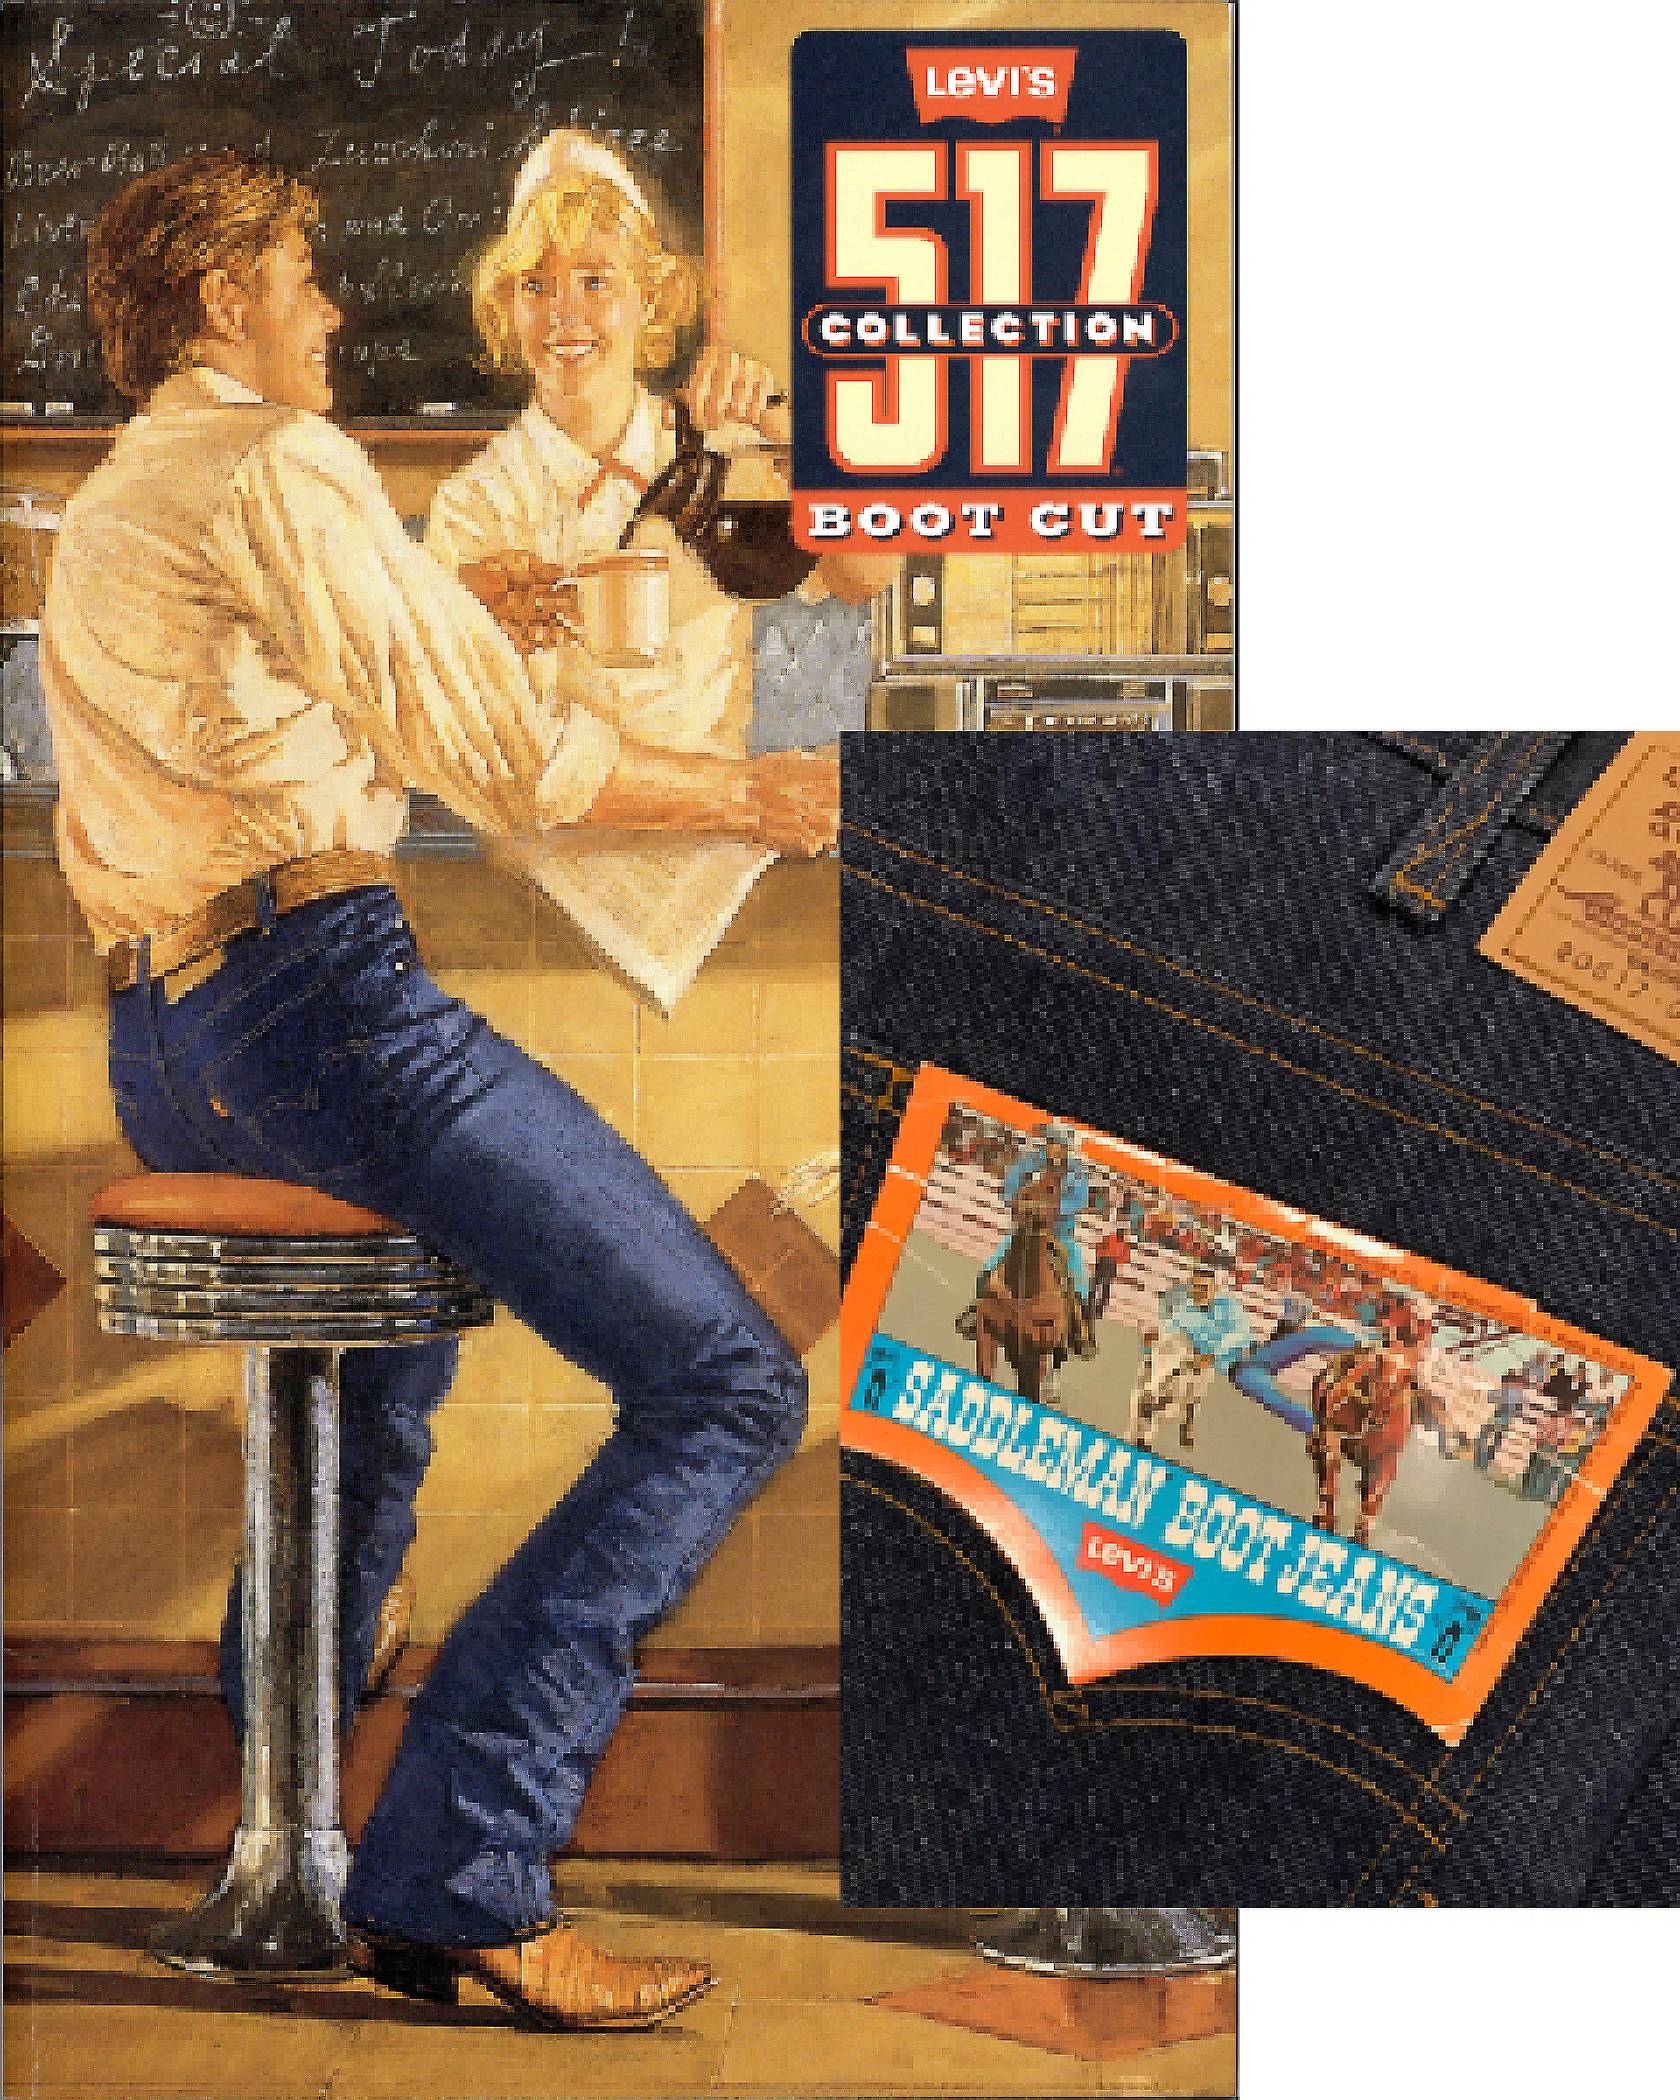 THE IT-JEANS OF THE 1960S